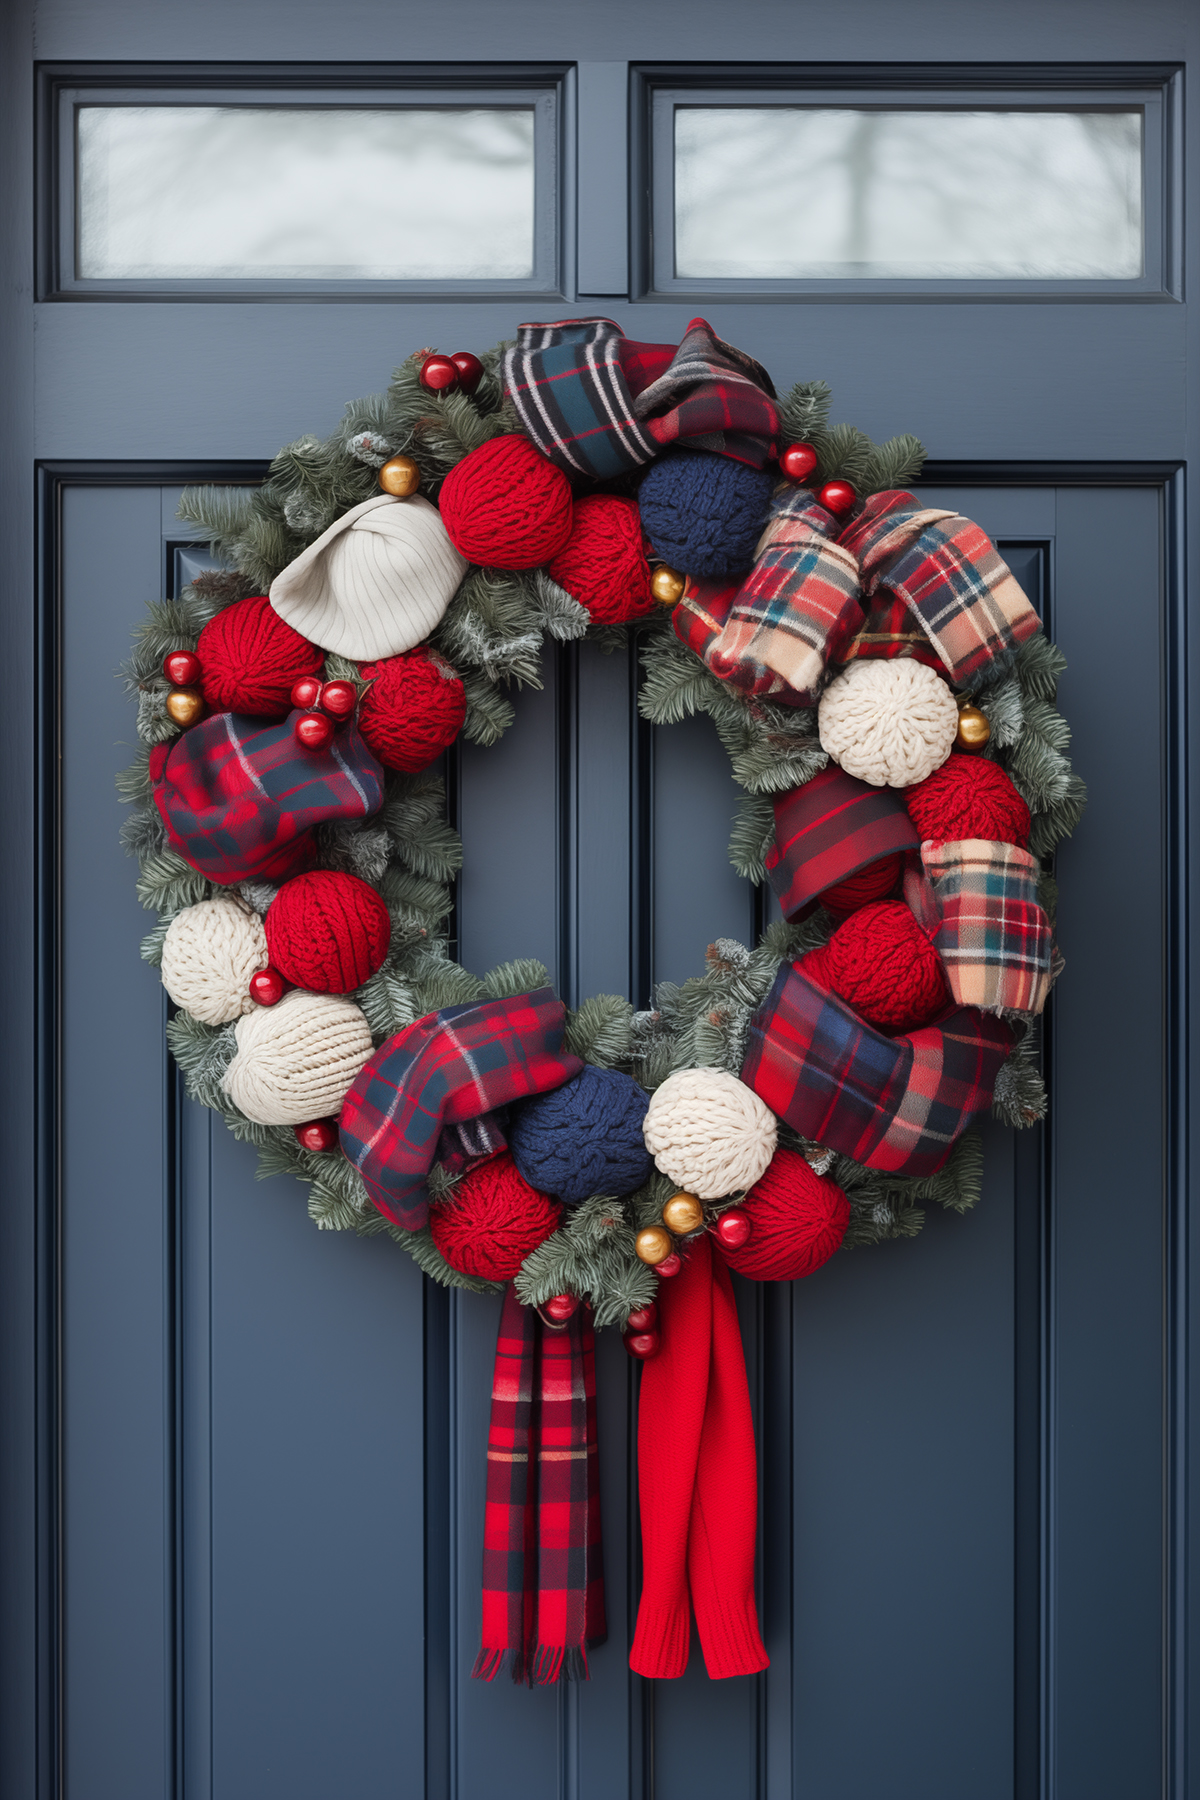 DIY Christmas evergreen wreath with scarves woven through it.